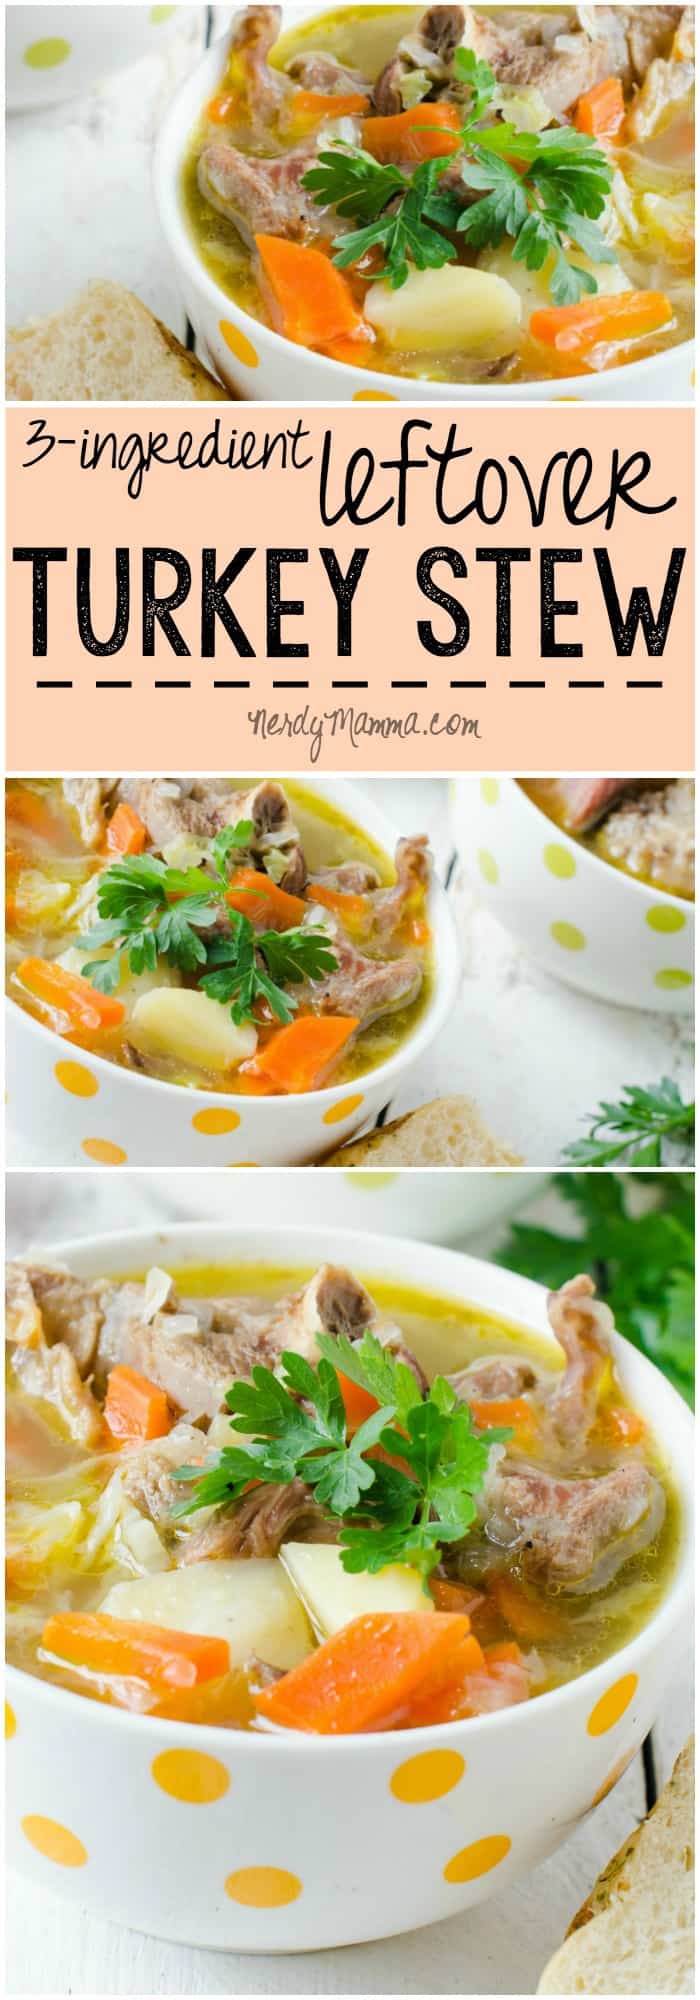 I always have so much leftover turkey after Thanksgiving.With this recipe, though, there won't be any leftovers left over! LOL! Savory Leftover Turkey Stew with only 3-ingredients. Awesome.